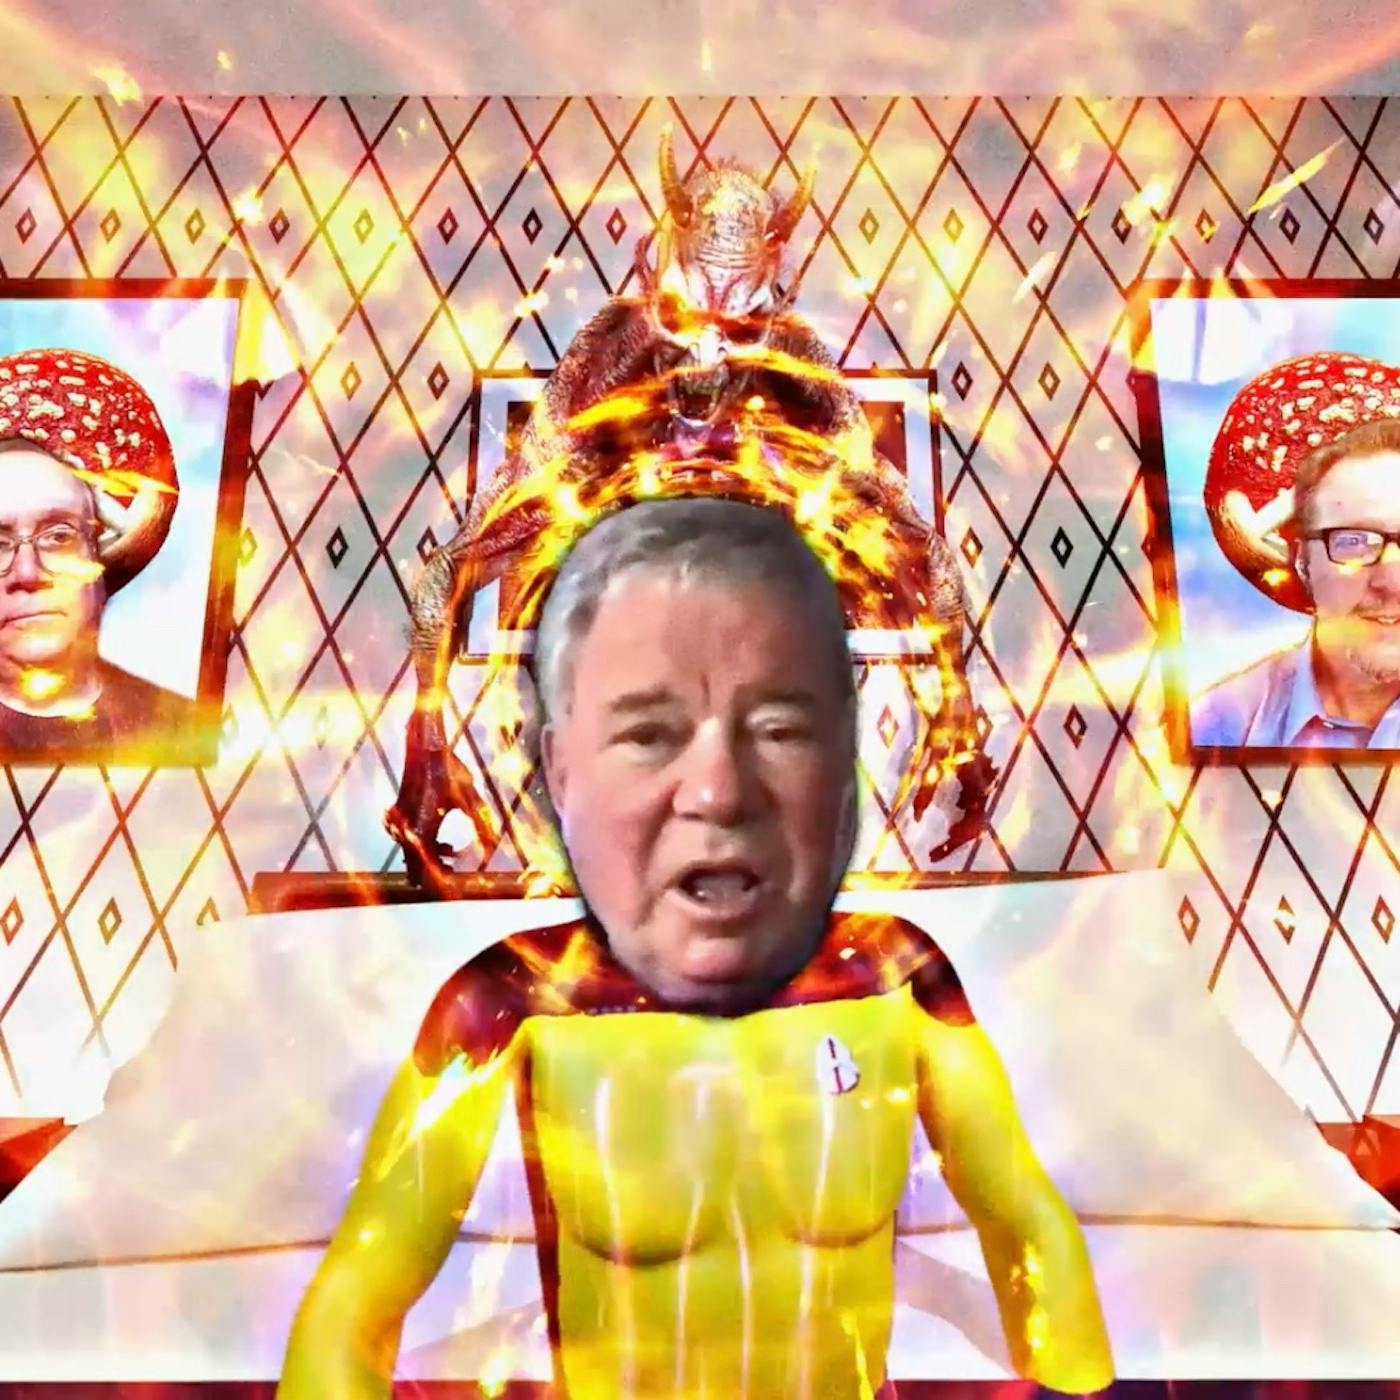 Tripping with William Shatner